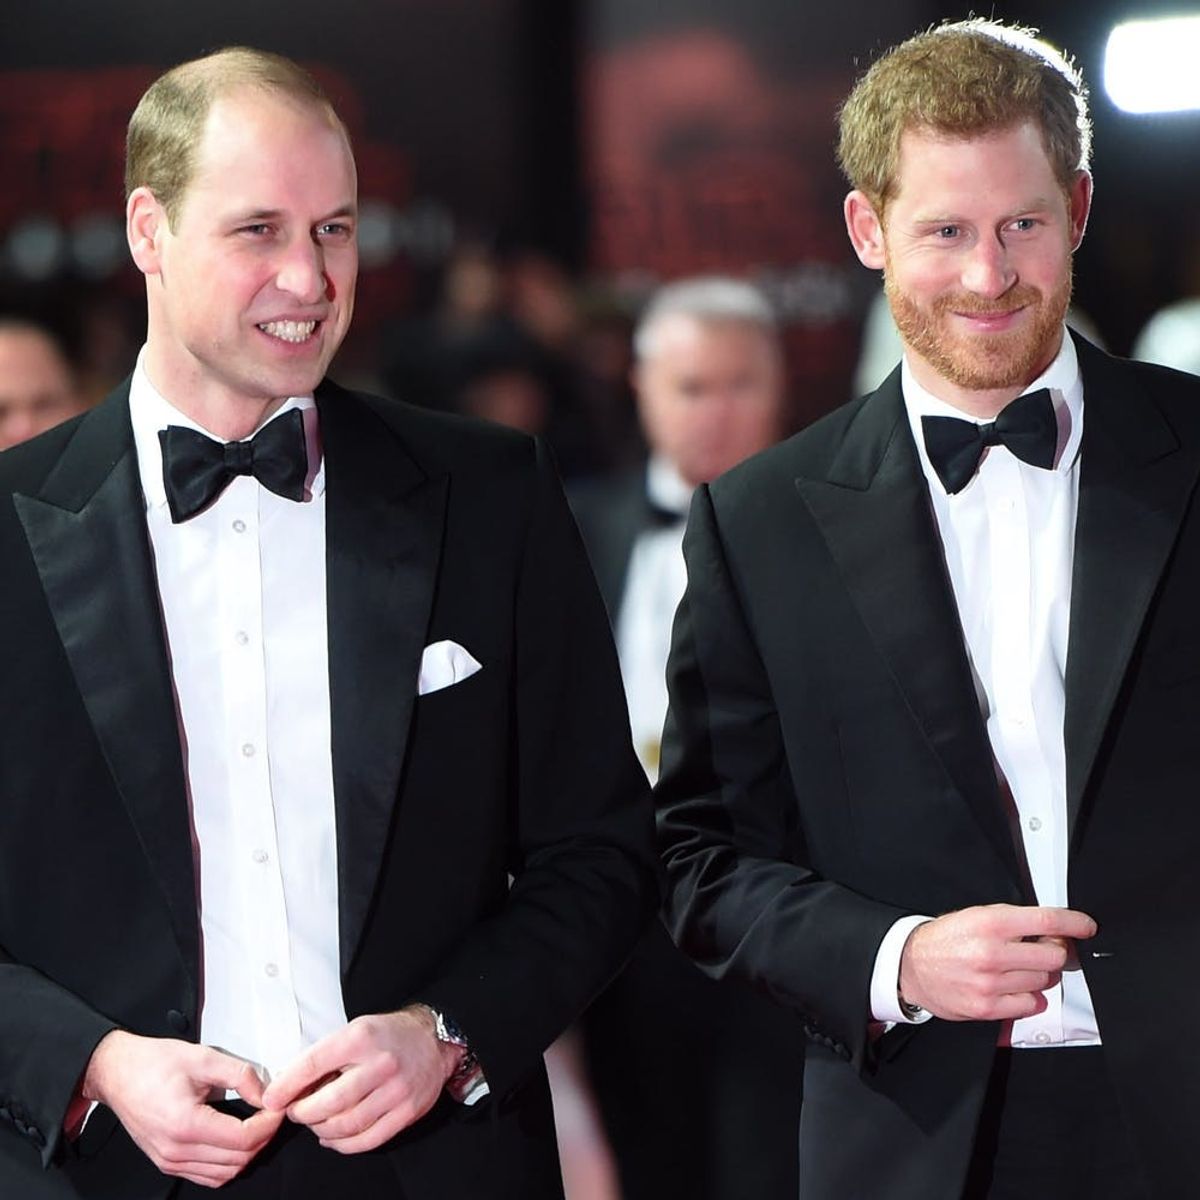 Prince Harry Has Asked Prince William to Be His Best Man at the Royal Wedding